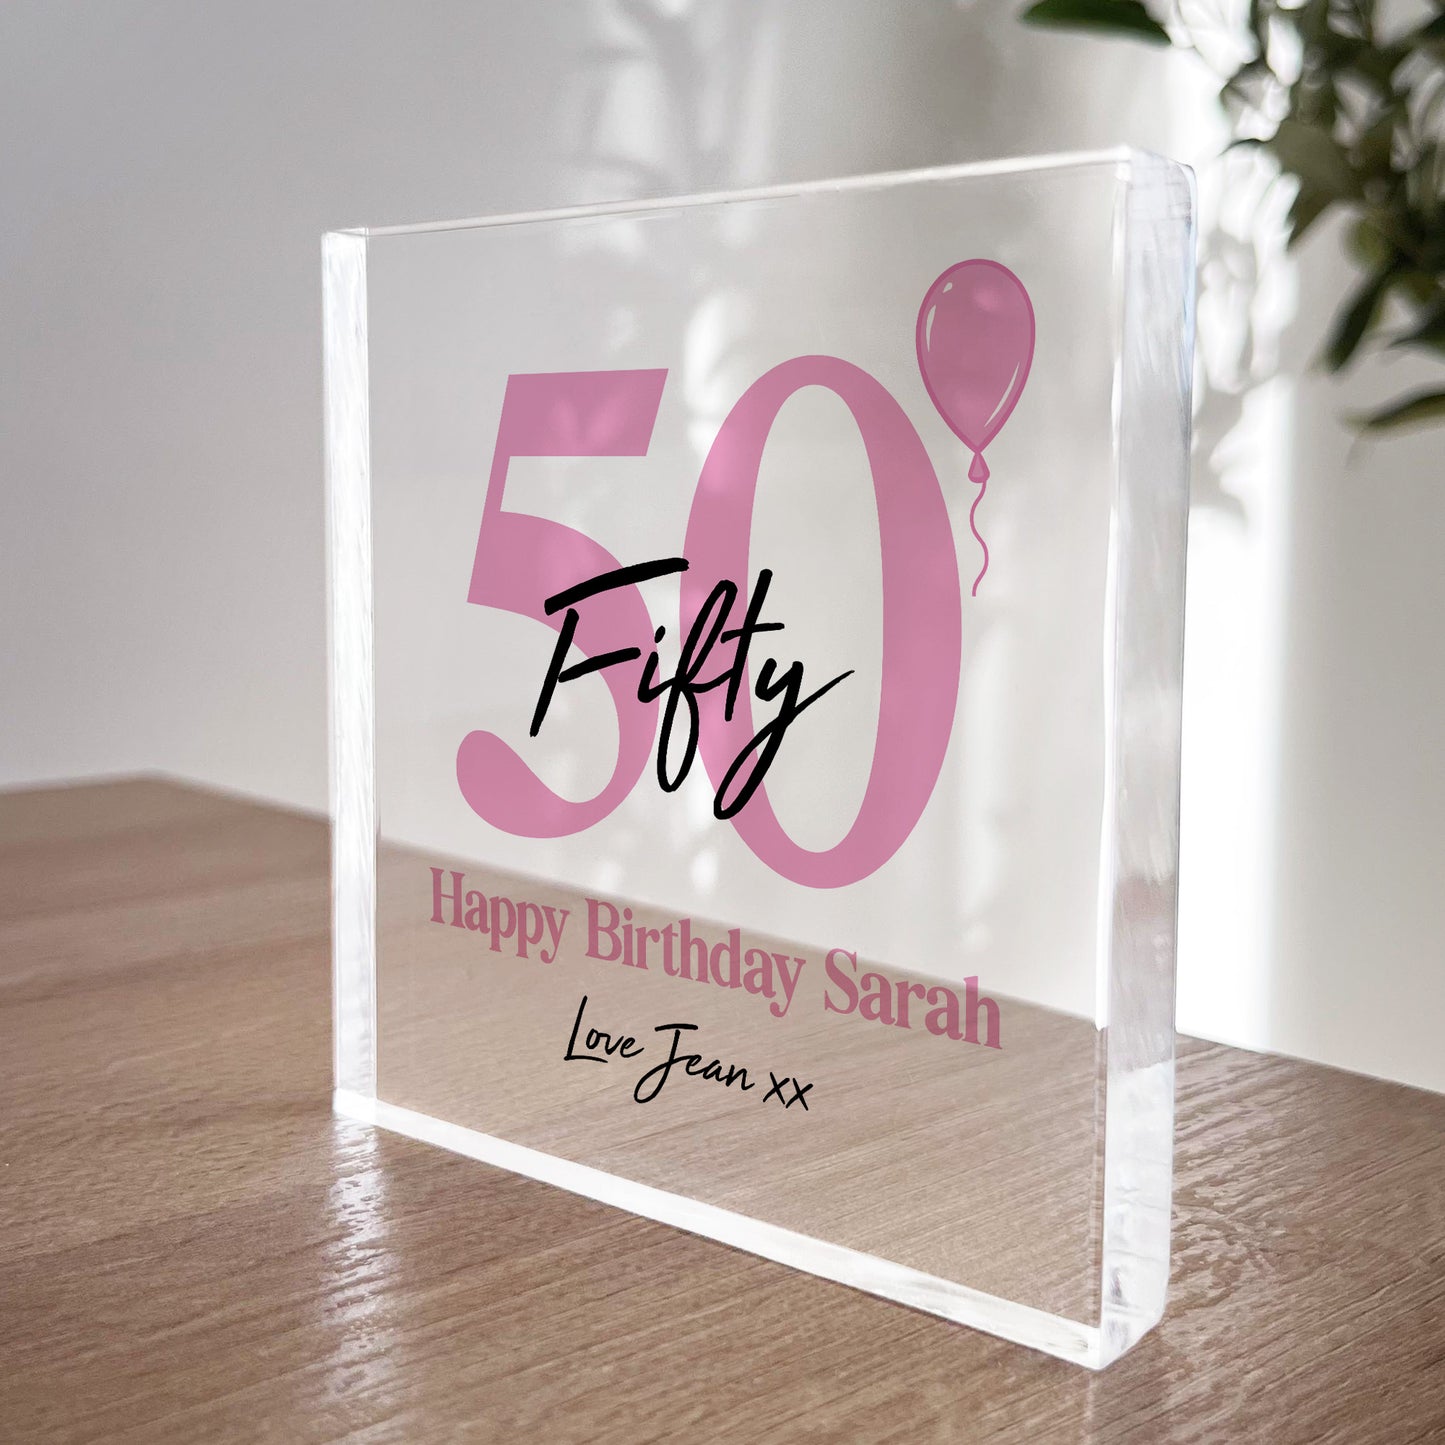 PERSONALISED 50th Birthday Gifts For Mum Nan Auntie Best Friend